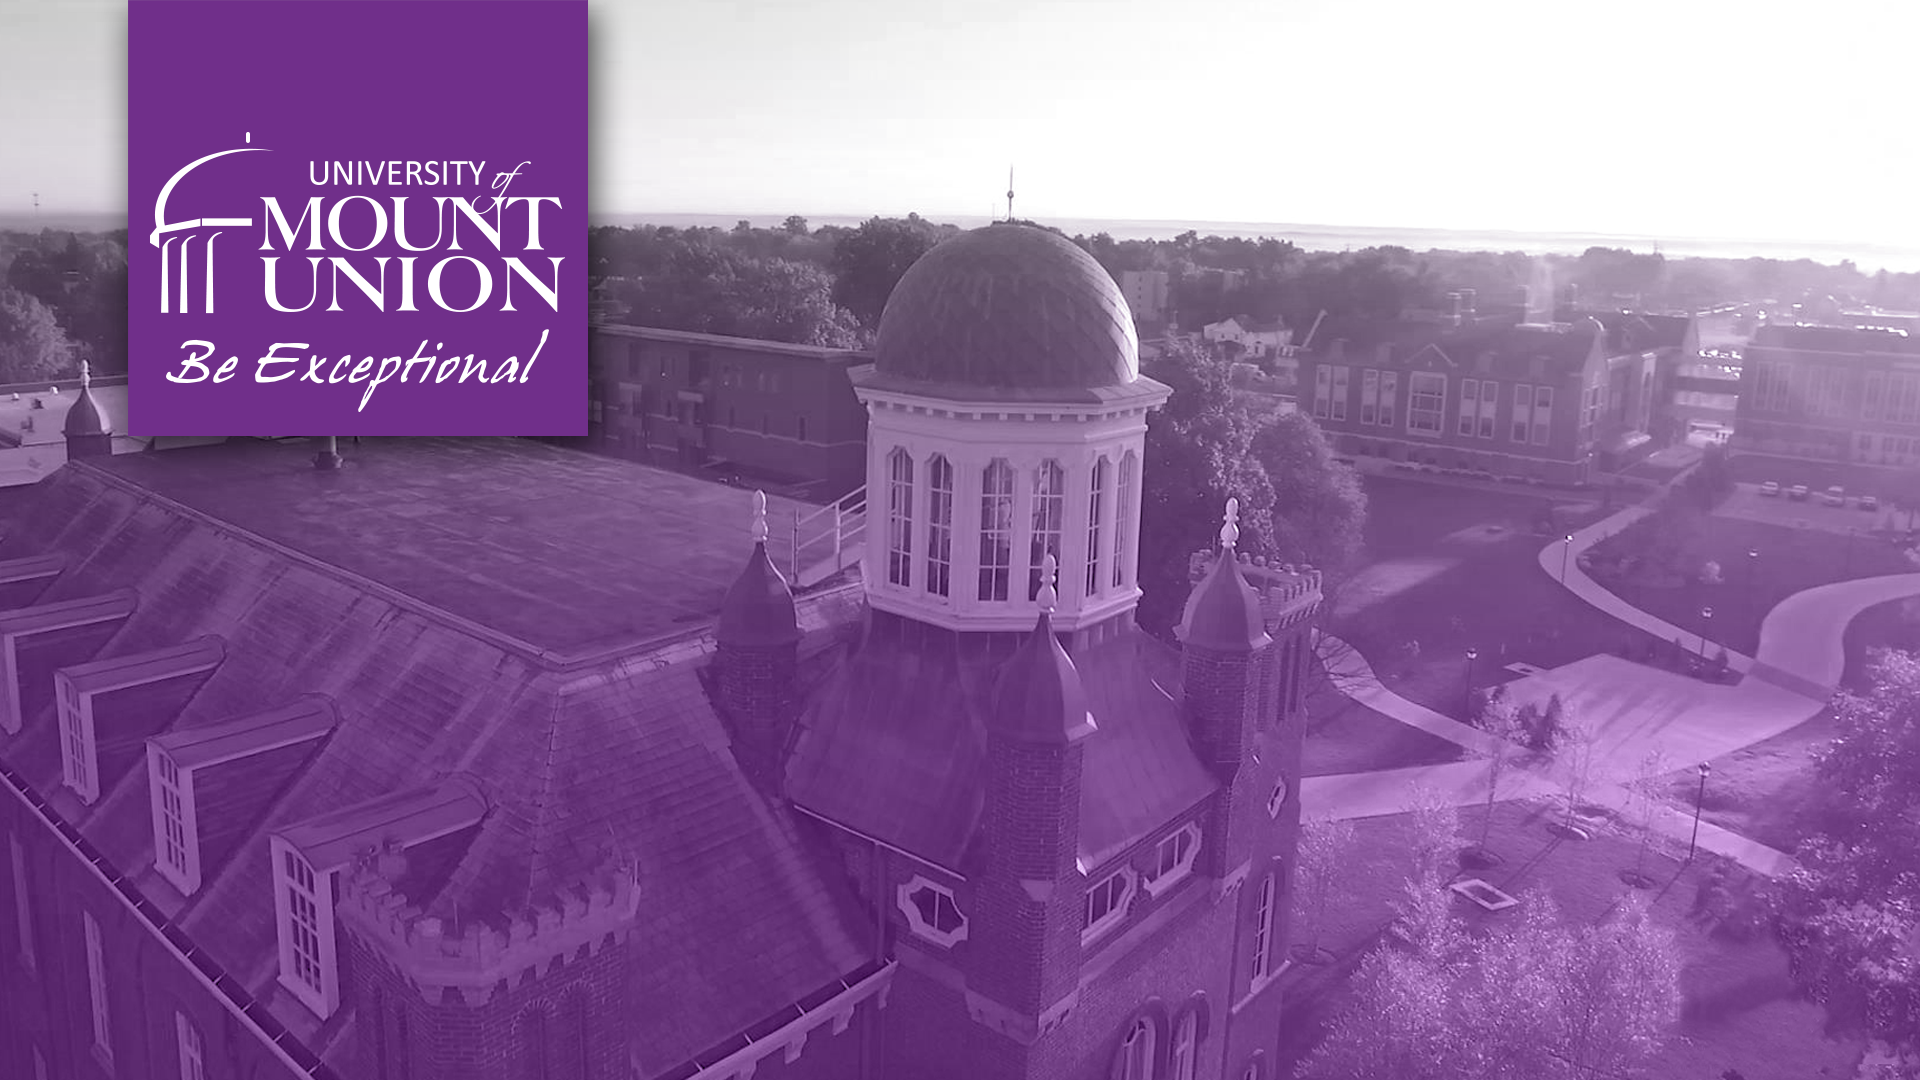 aerial shot of campus with purple overlay and logo